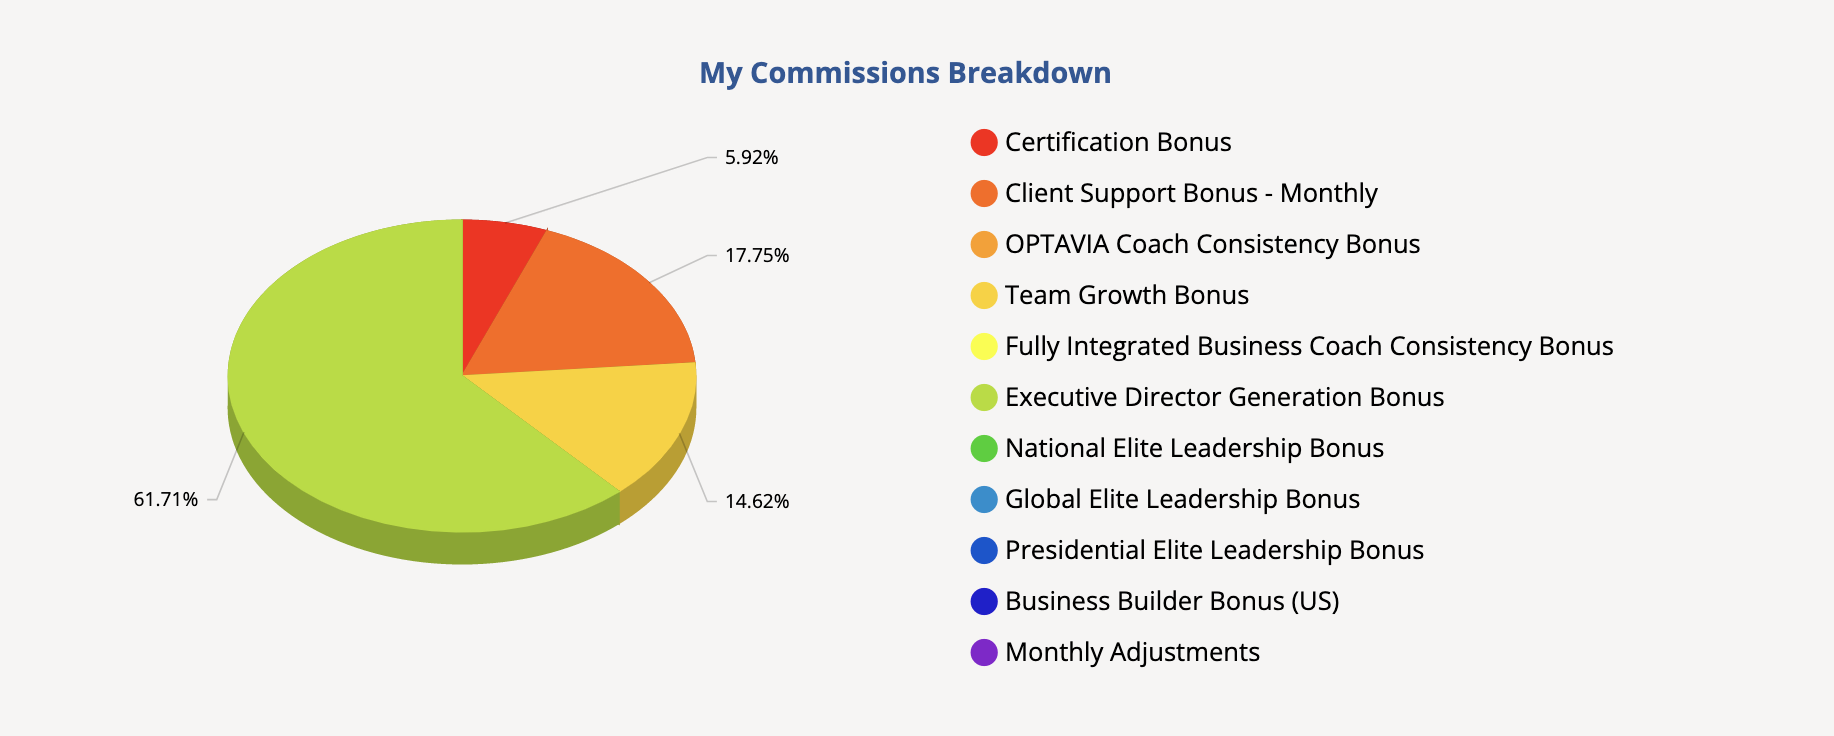 My Commission Breakdown pie chart - quickly provides a visual representation on which bonuses made up the majority of the Coaches earnings.